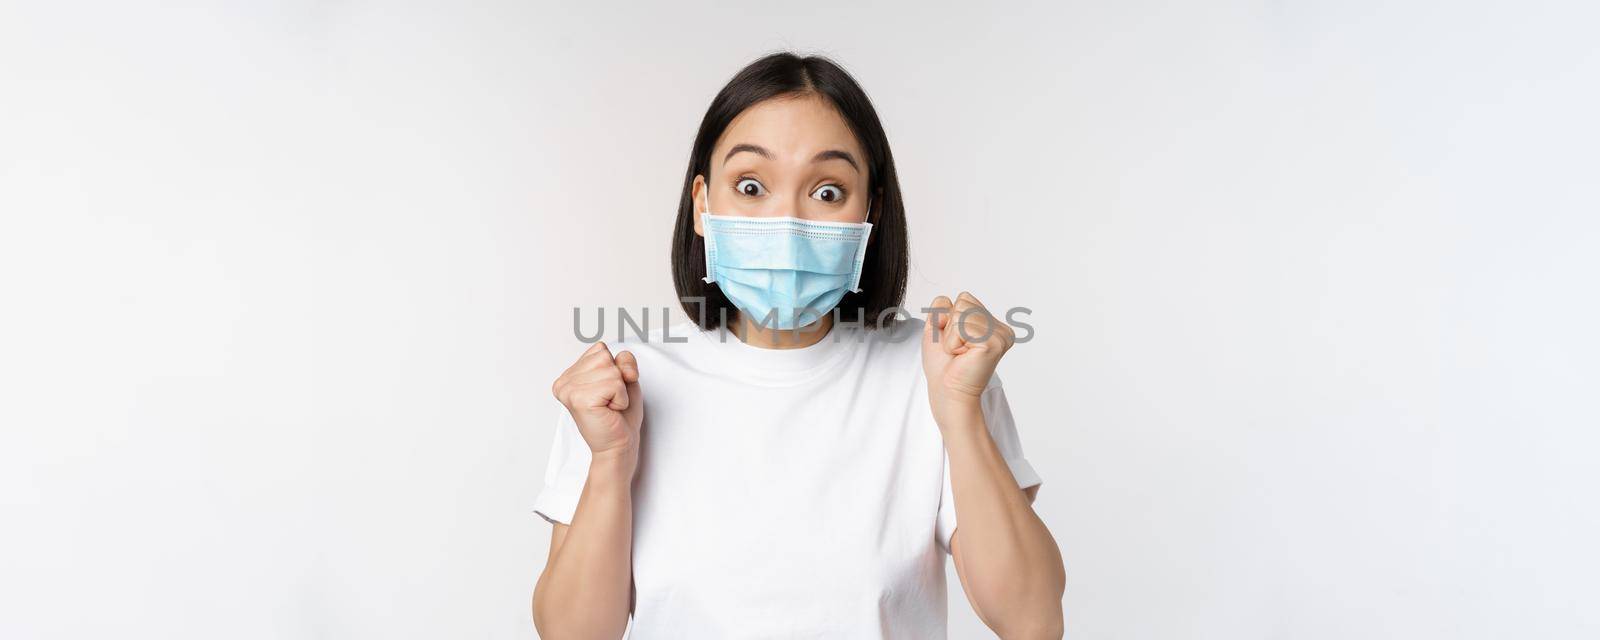 Covid-19, healthcare and medical concept. Enthusiastic asian woman in medical face mask, dancing and celebrating, winning, achieve goal, standing over white background.